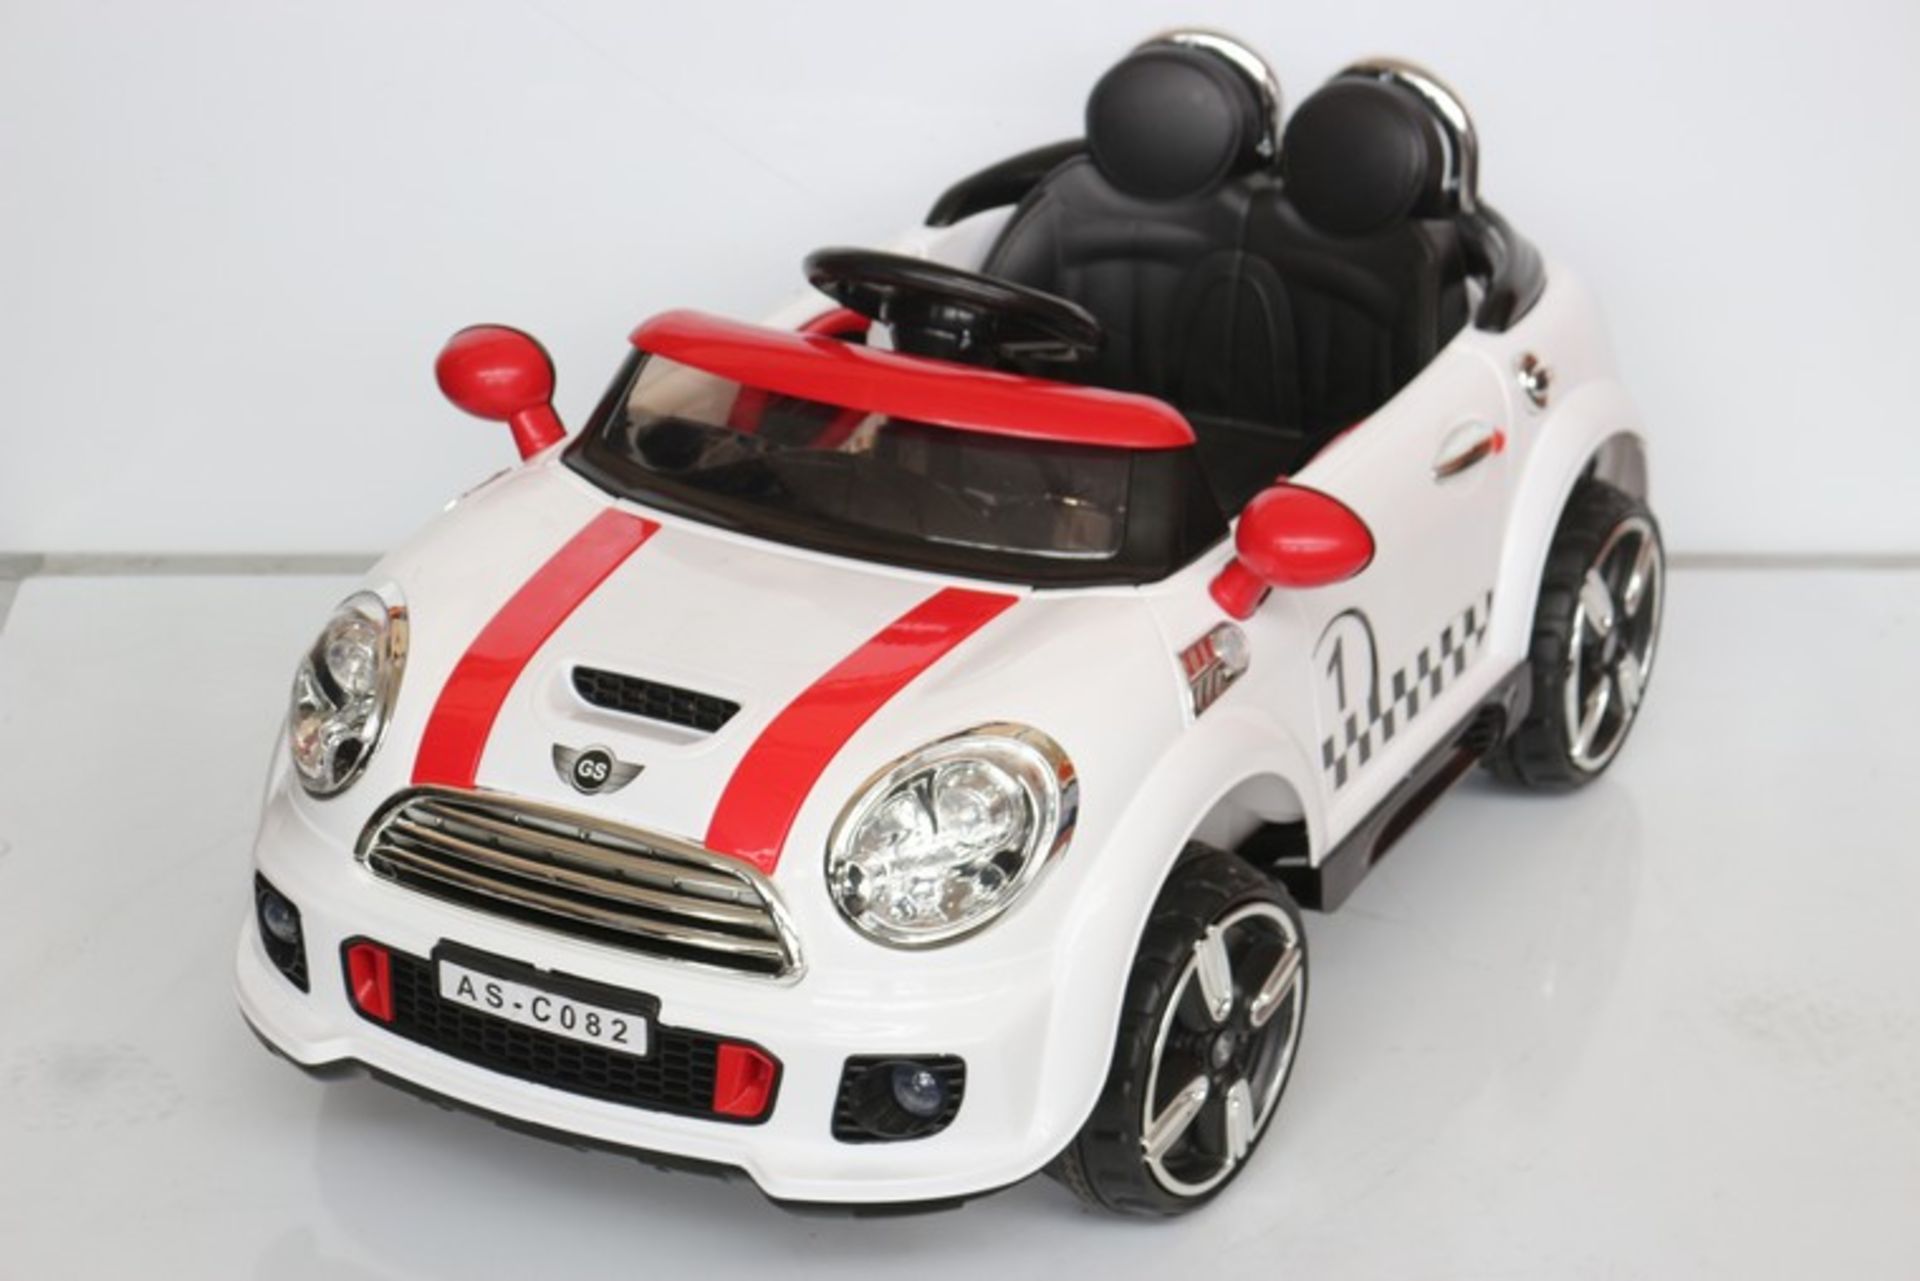 1X BOXED BRAND NEW MINI STYLE RIDE ON CHILDREN'S CAR 12V I PHONE AND USB LINK ON BOARD HI-FI